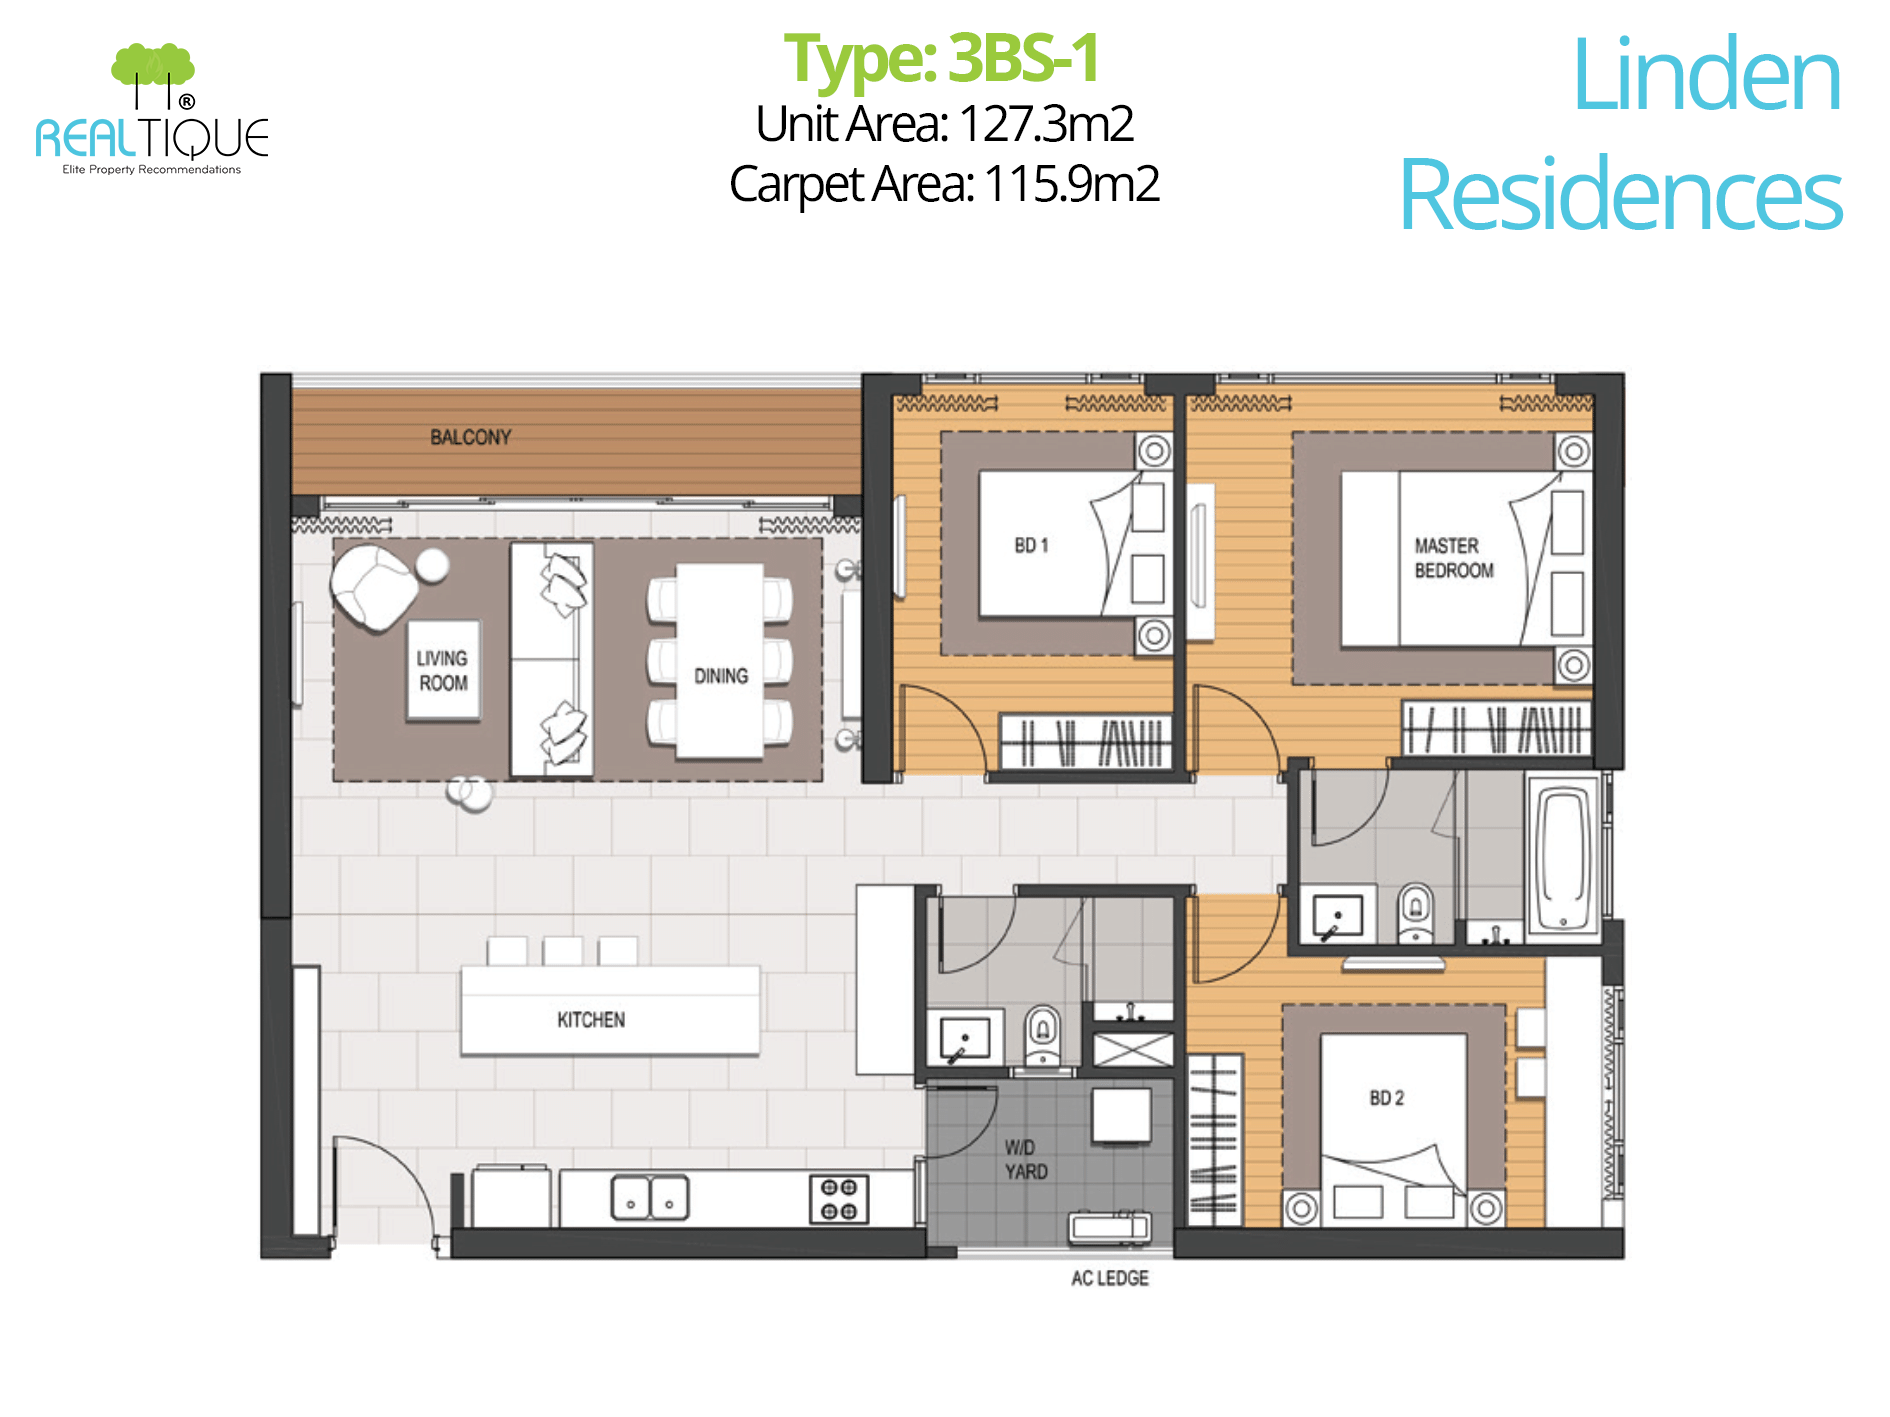 3-bedroom apartment (small) in Linden Residences (MU4)